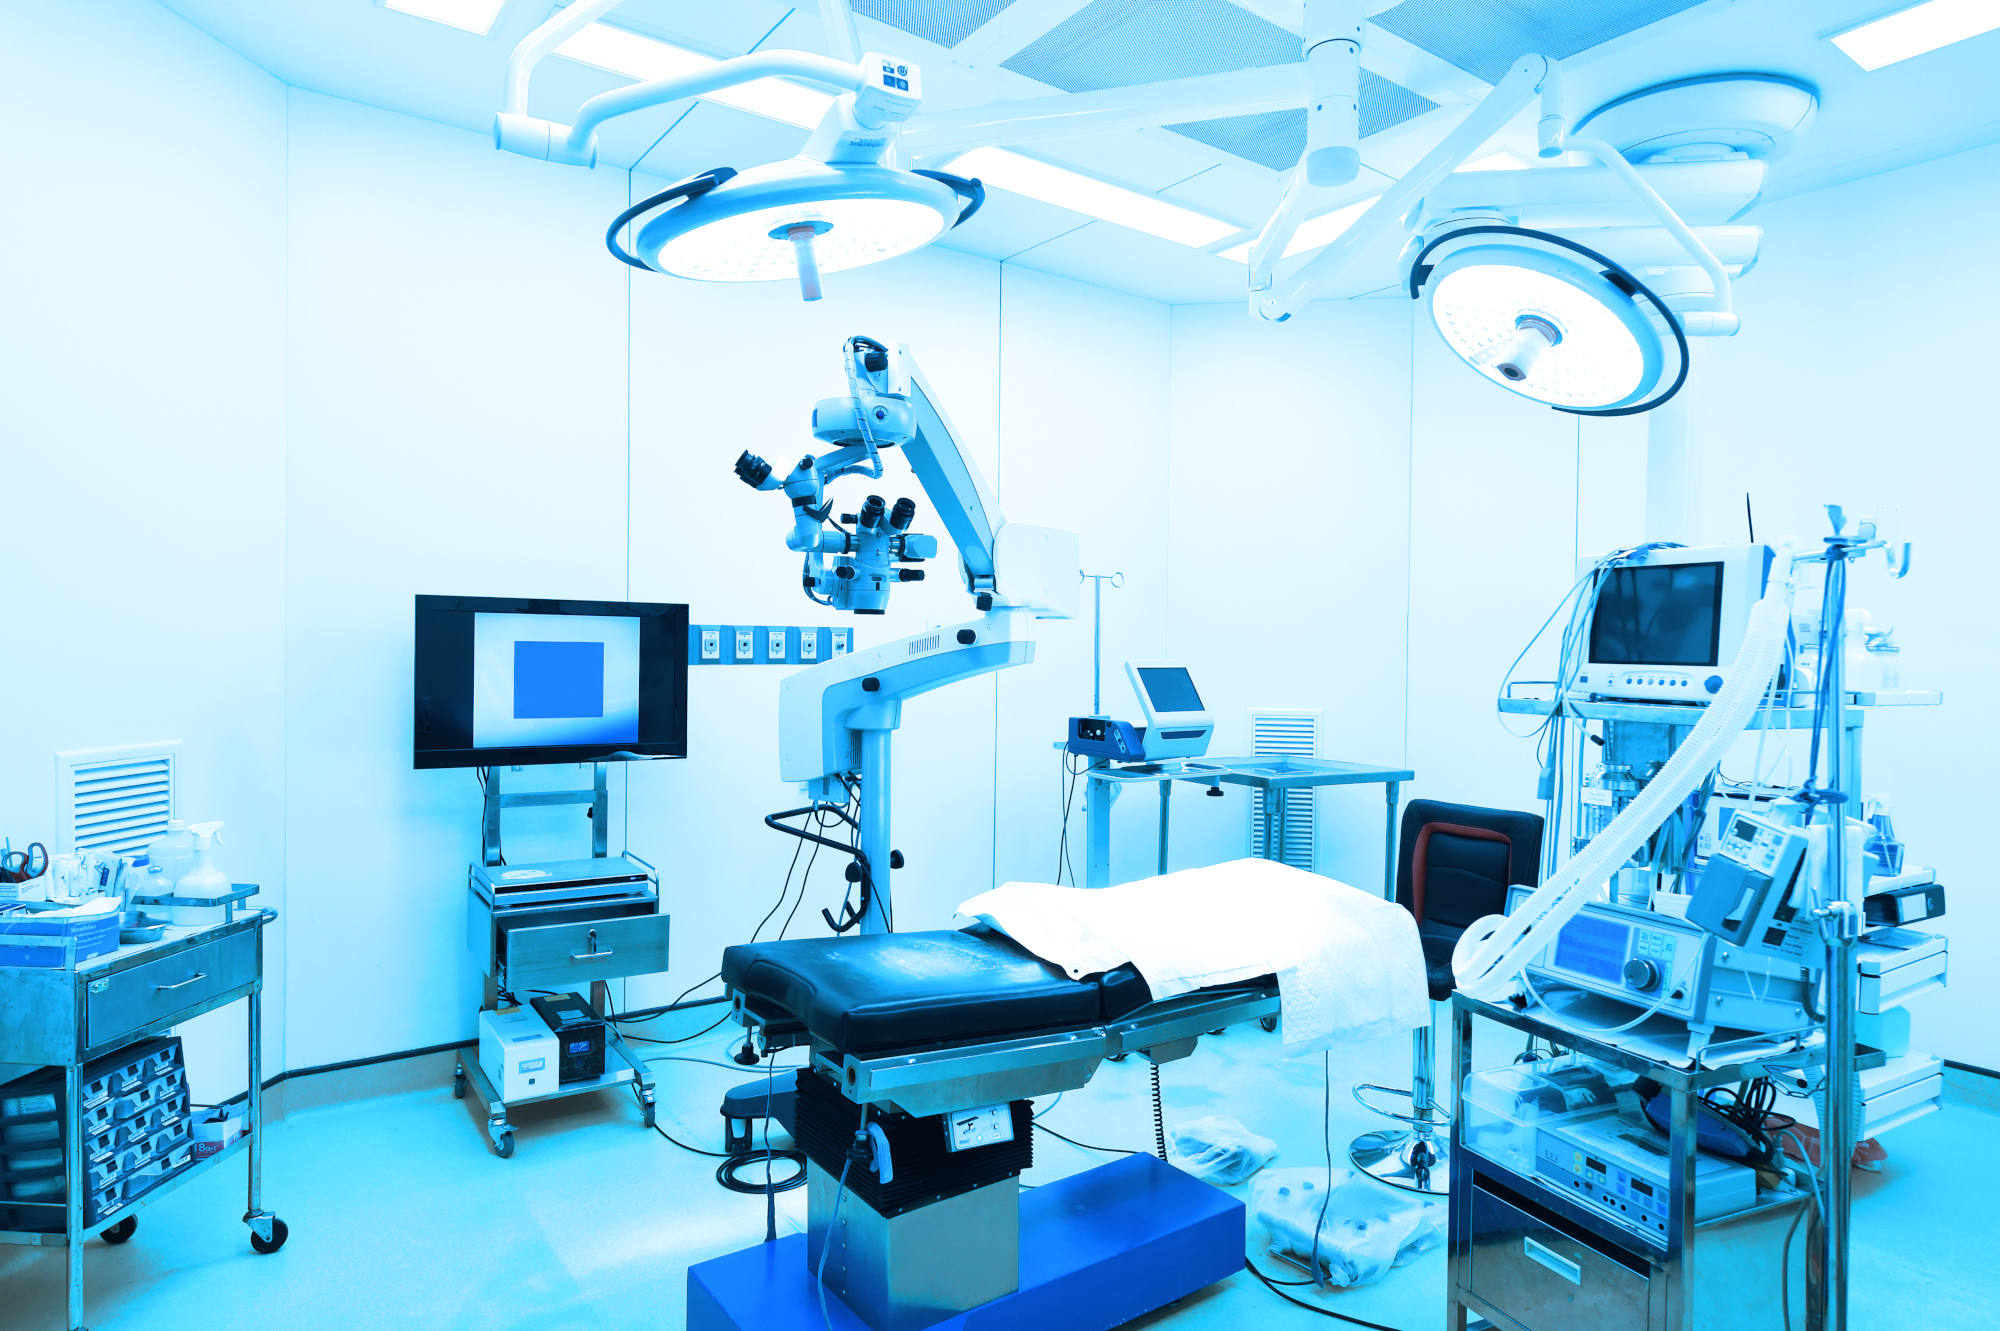 Equipment and medical devices in modern operating room - Depositphotos_164806690_XL